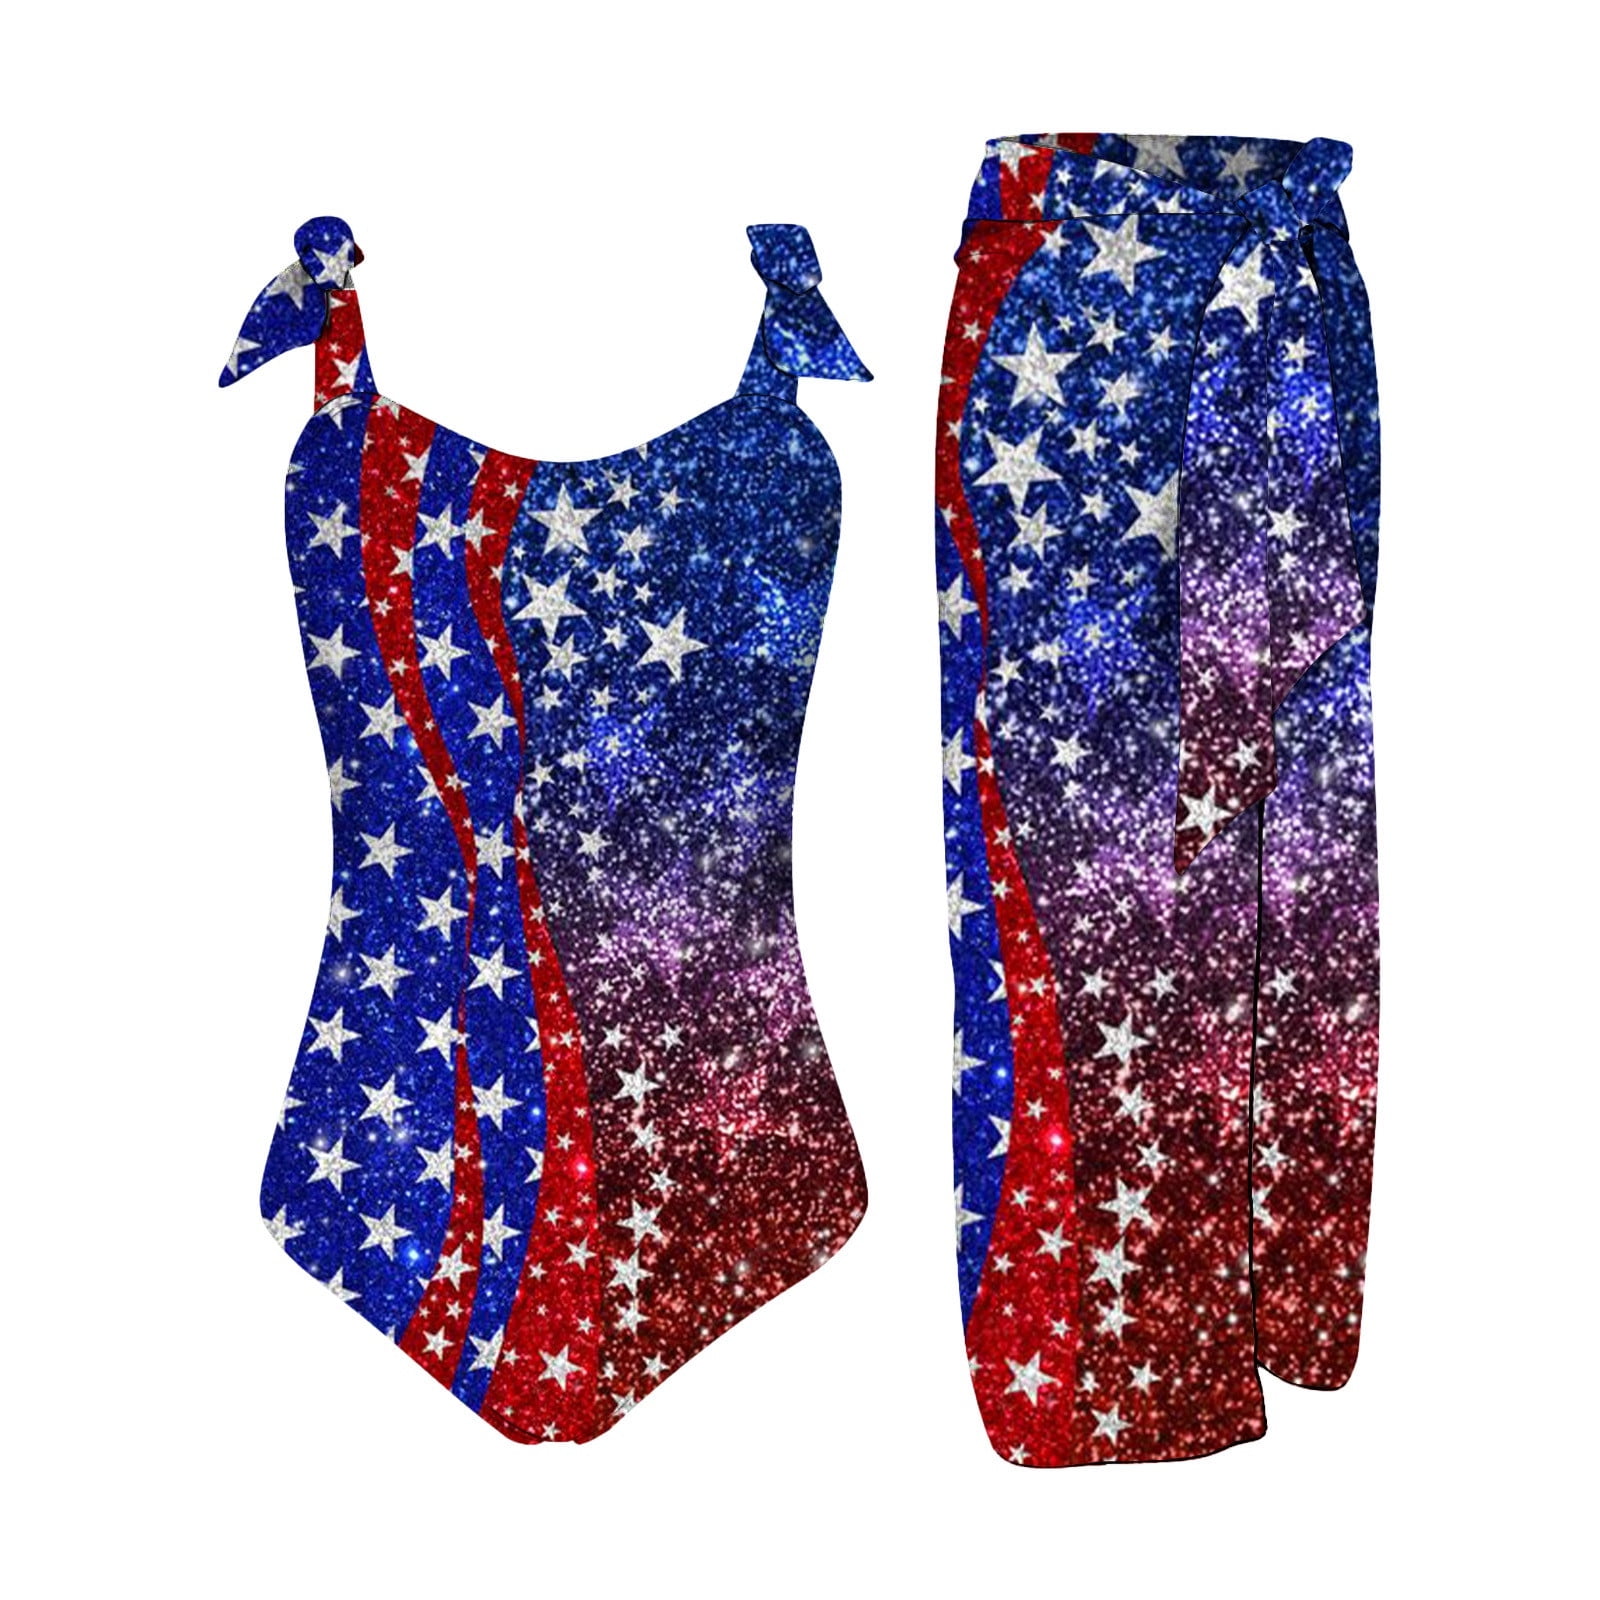 Baycosin USA Independence Day Women's Swimwear Cover Up Set: Patriotic ...